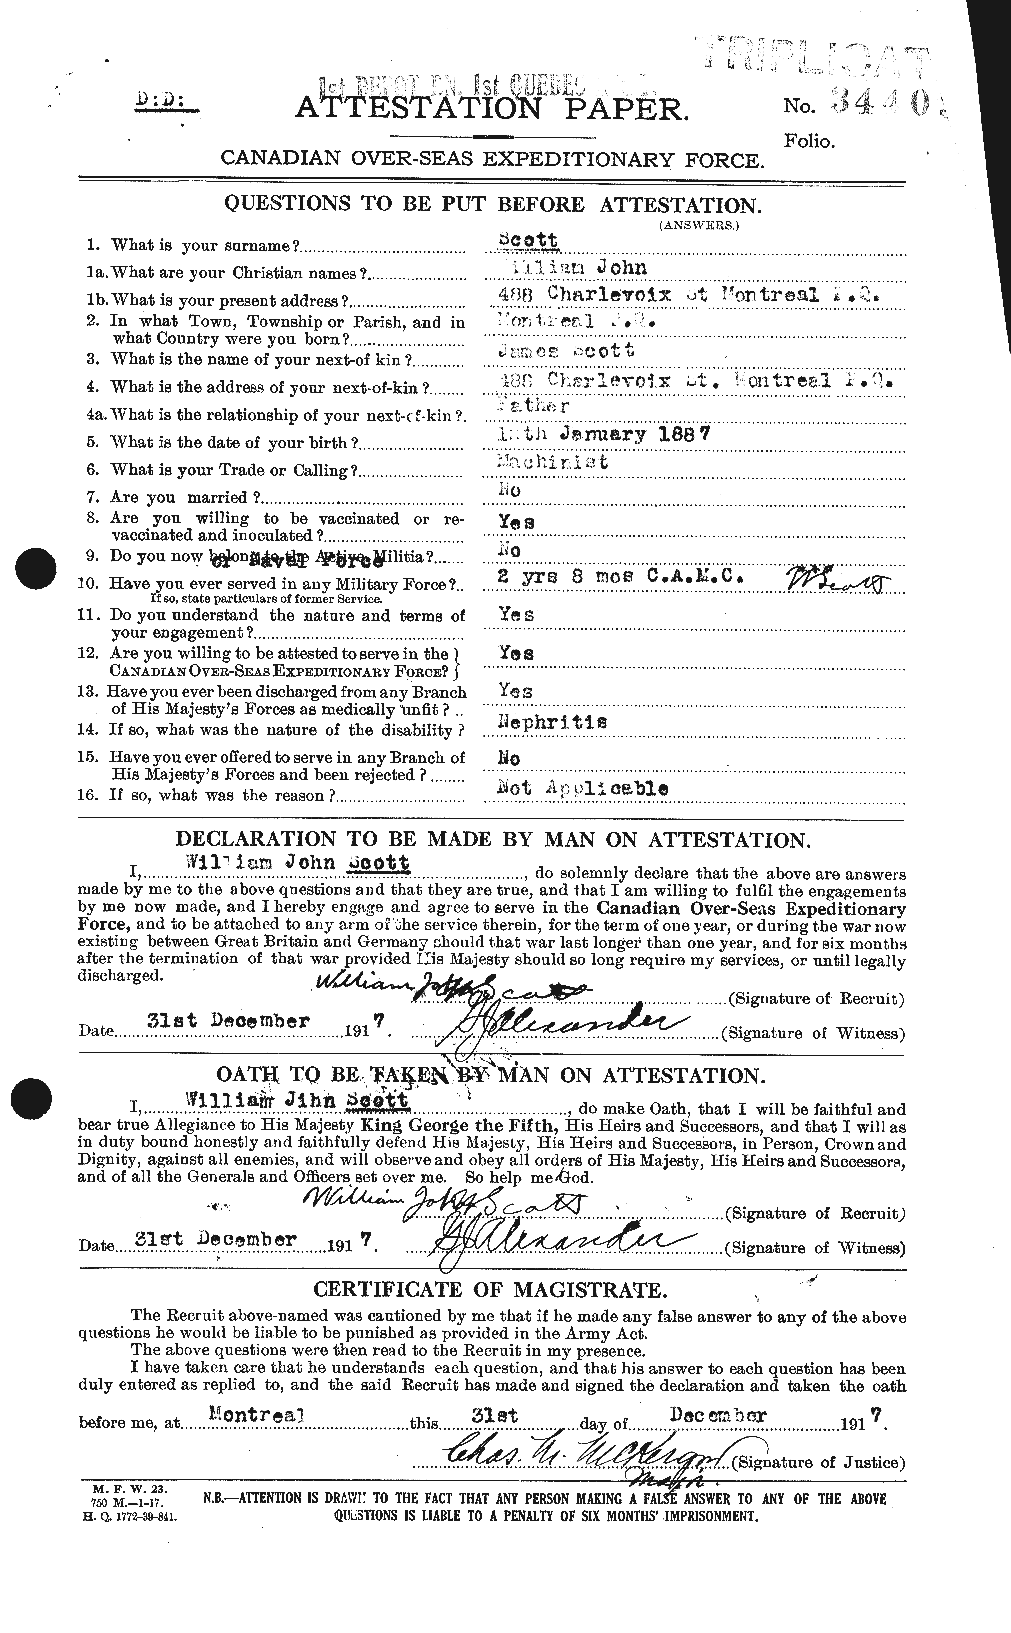 Personnel Records of the First World War - CEF 086758a